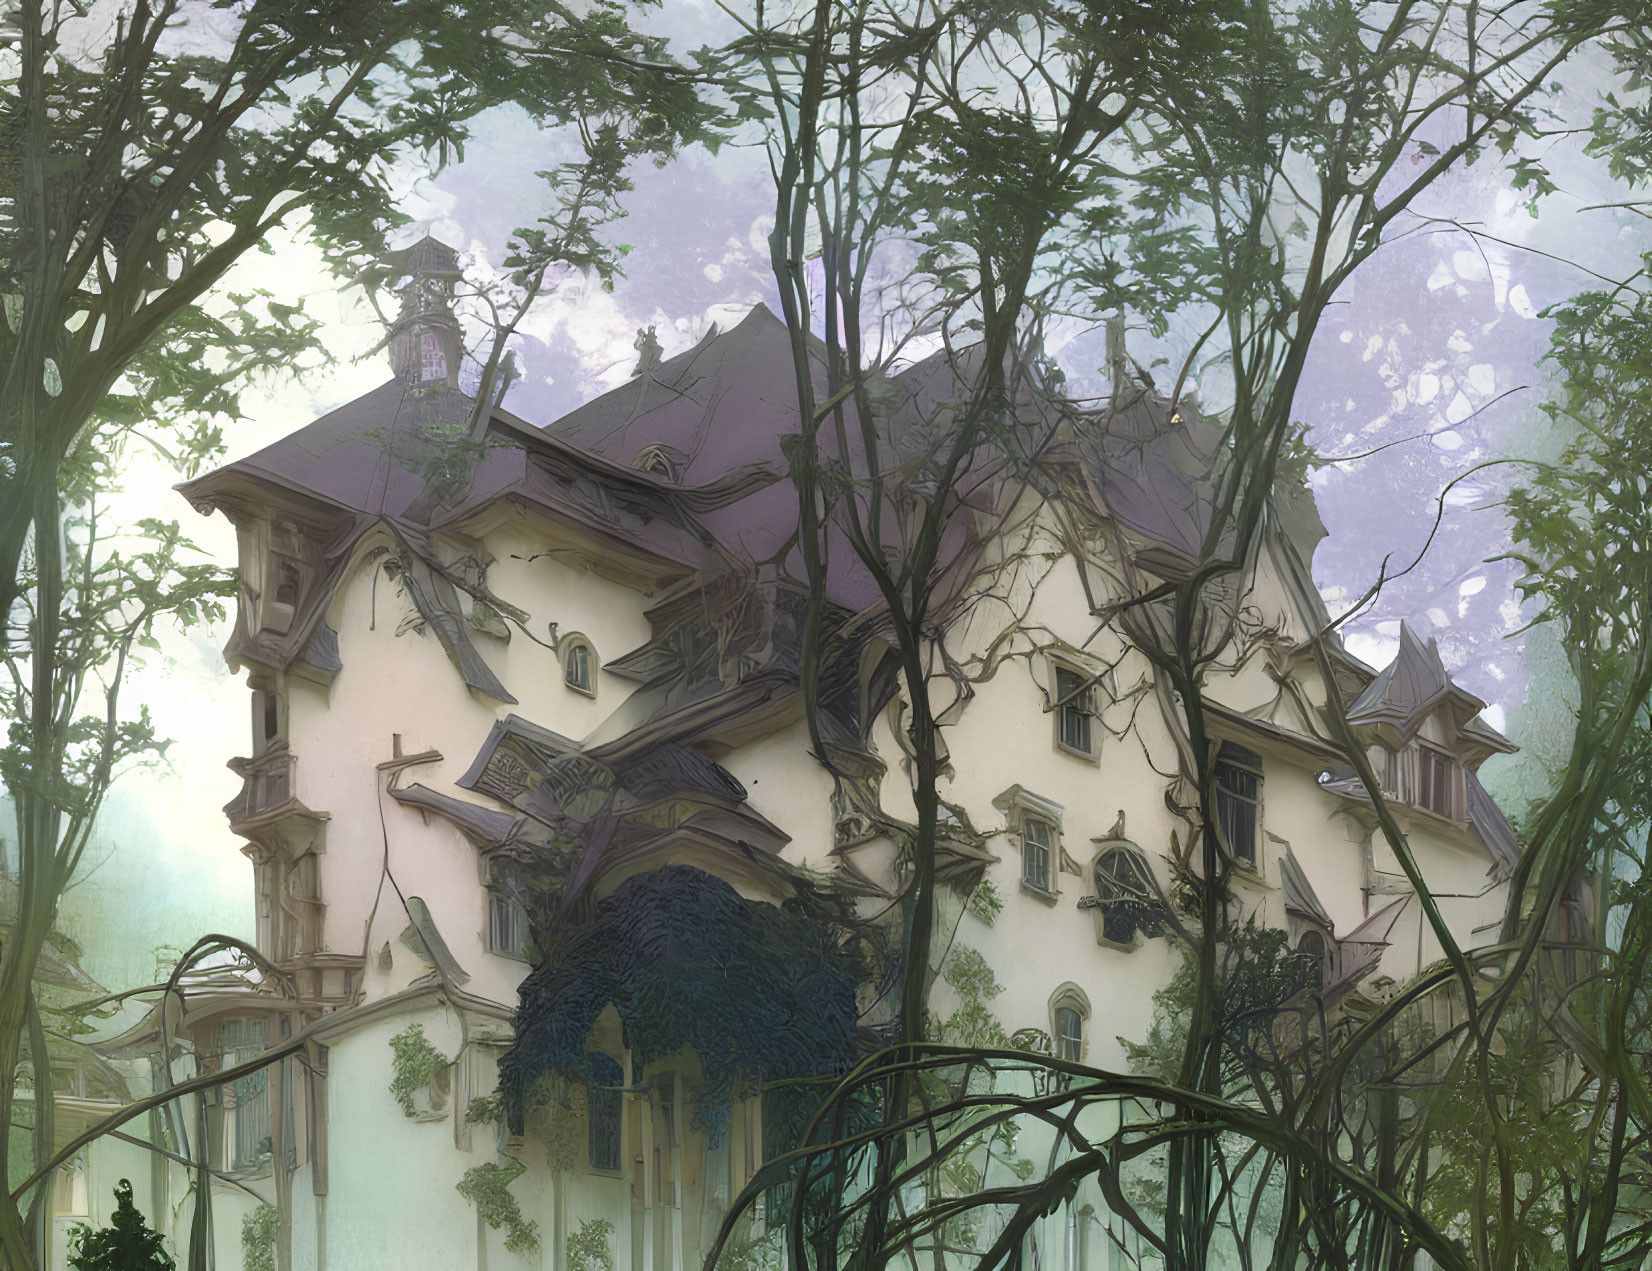 Detailed illustration of grand mansion engulfed by trees and foggy forest ambiance